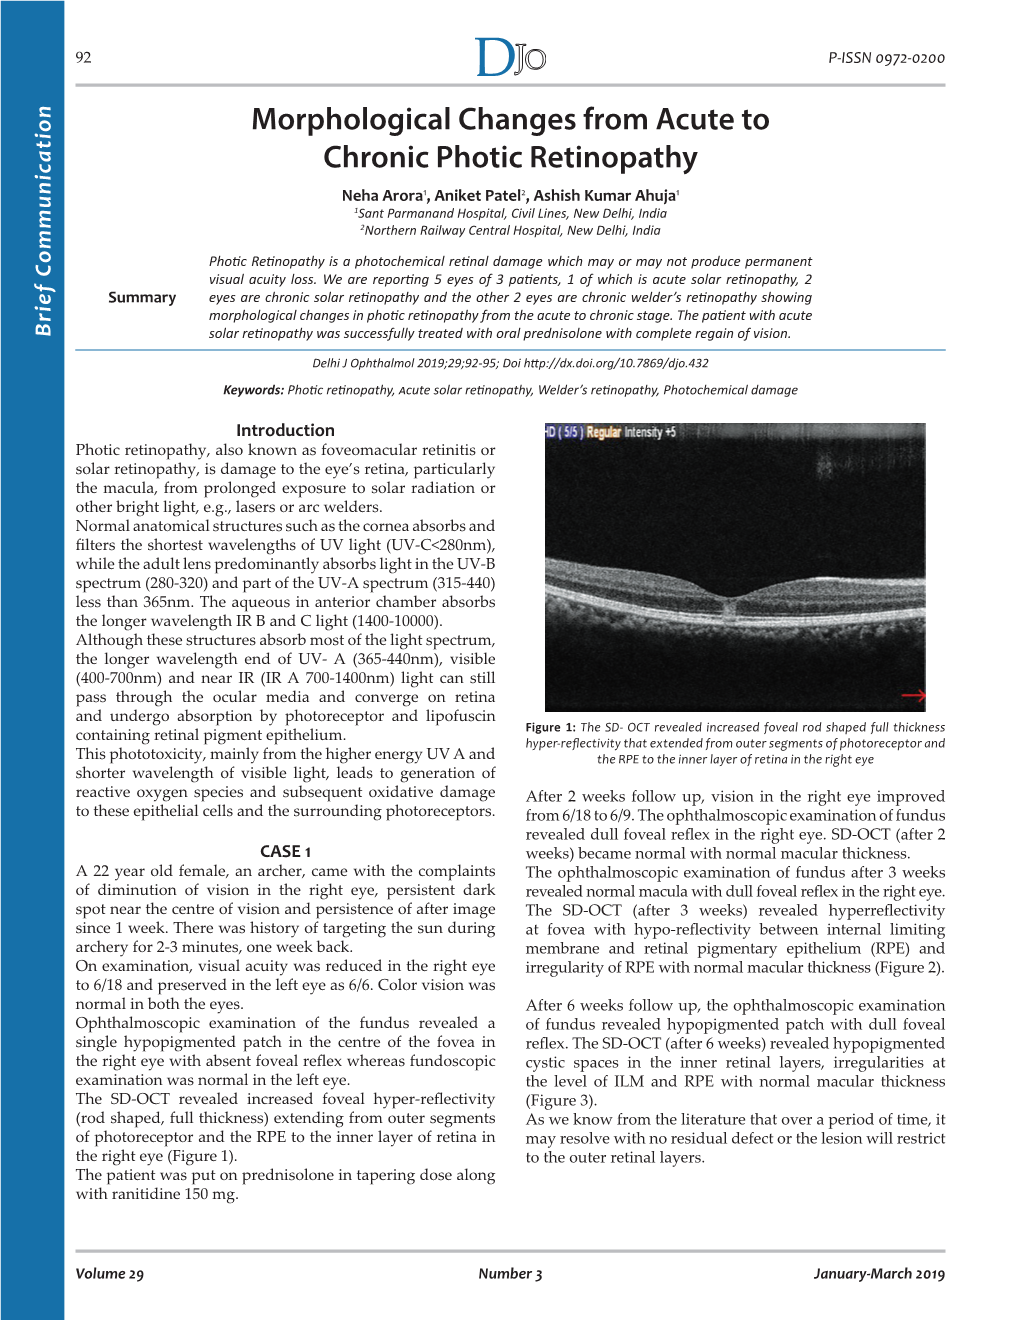 Morphological Changes from Acute to Chronic Photic Retinopathy